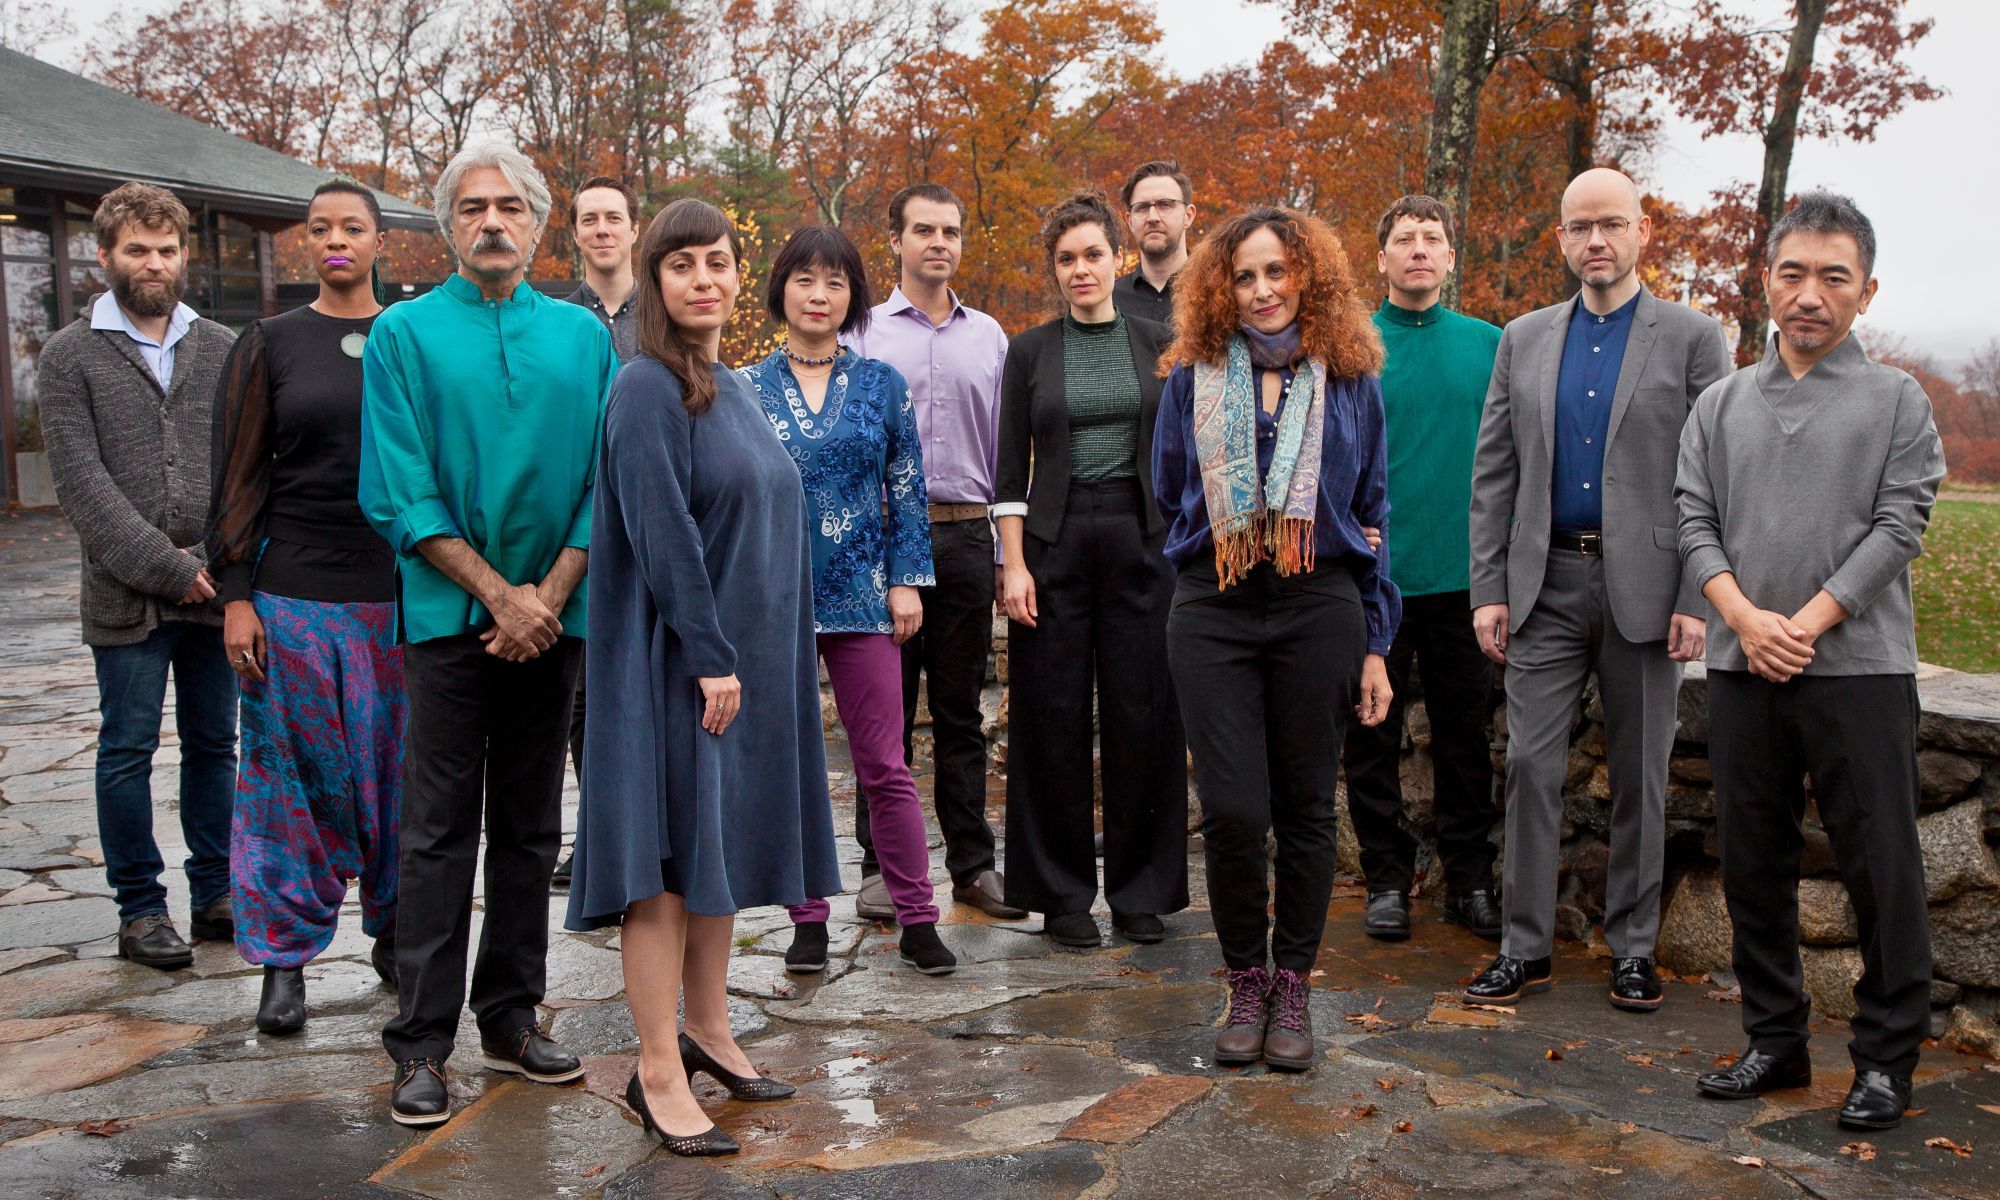 13 musicians in casual attire pose in front of trees with autumn colors